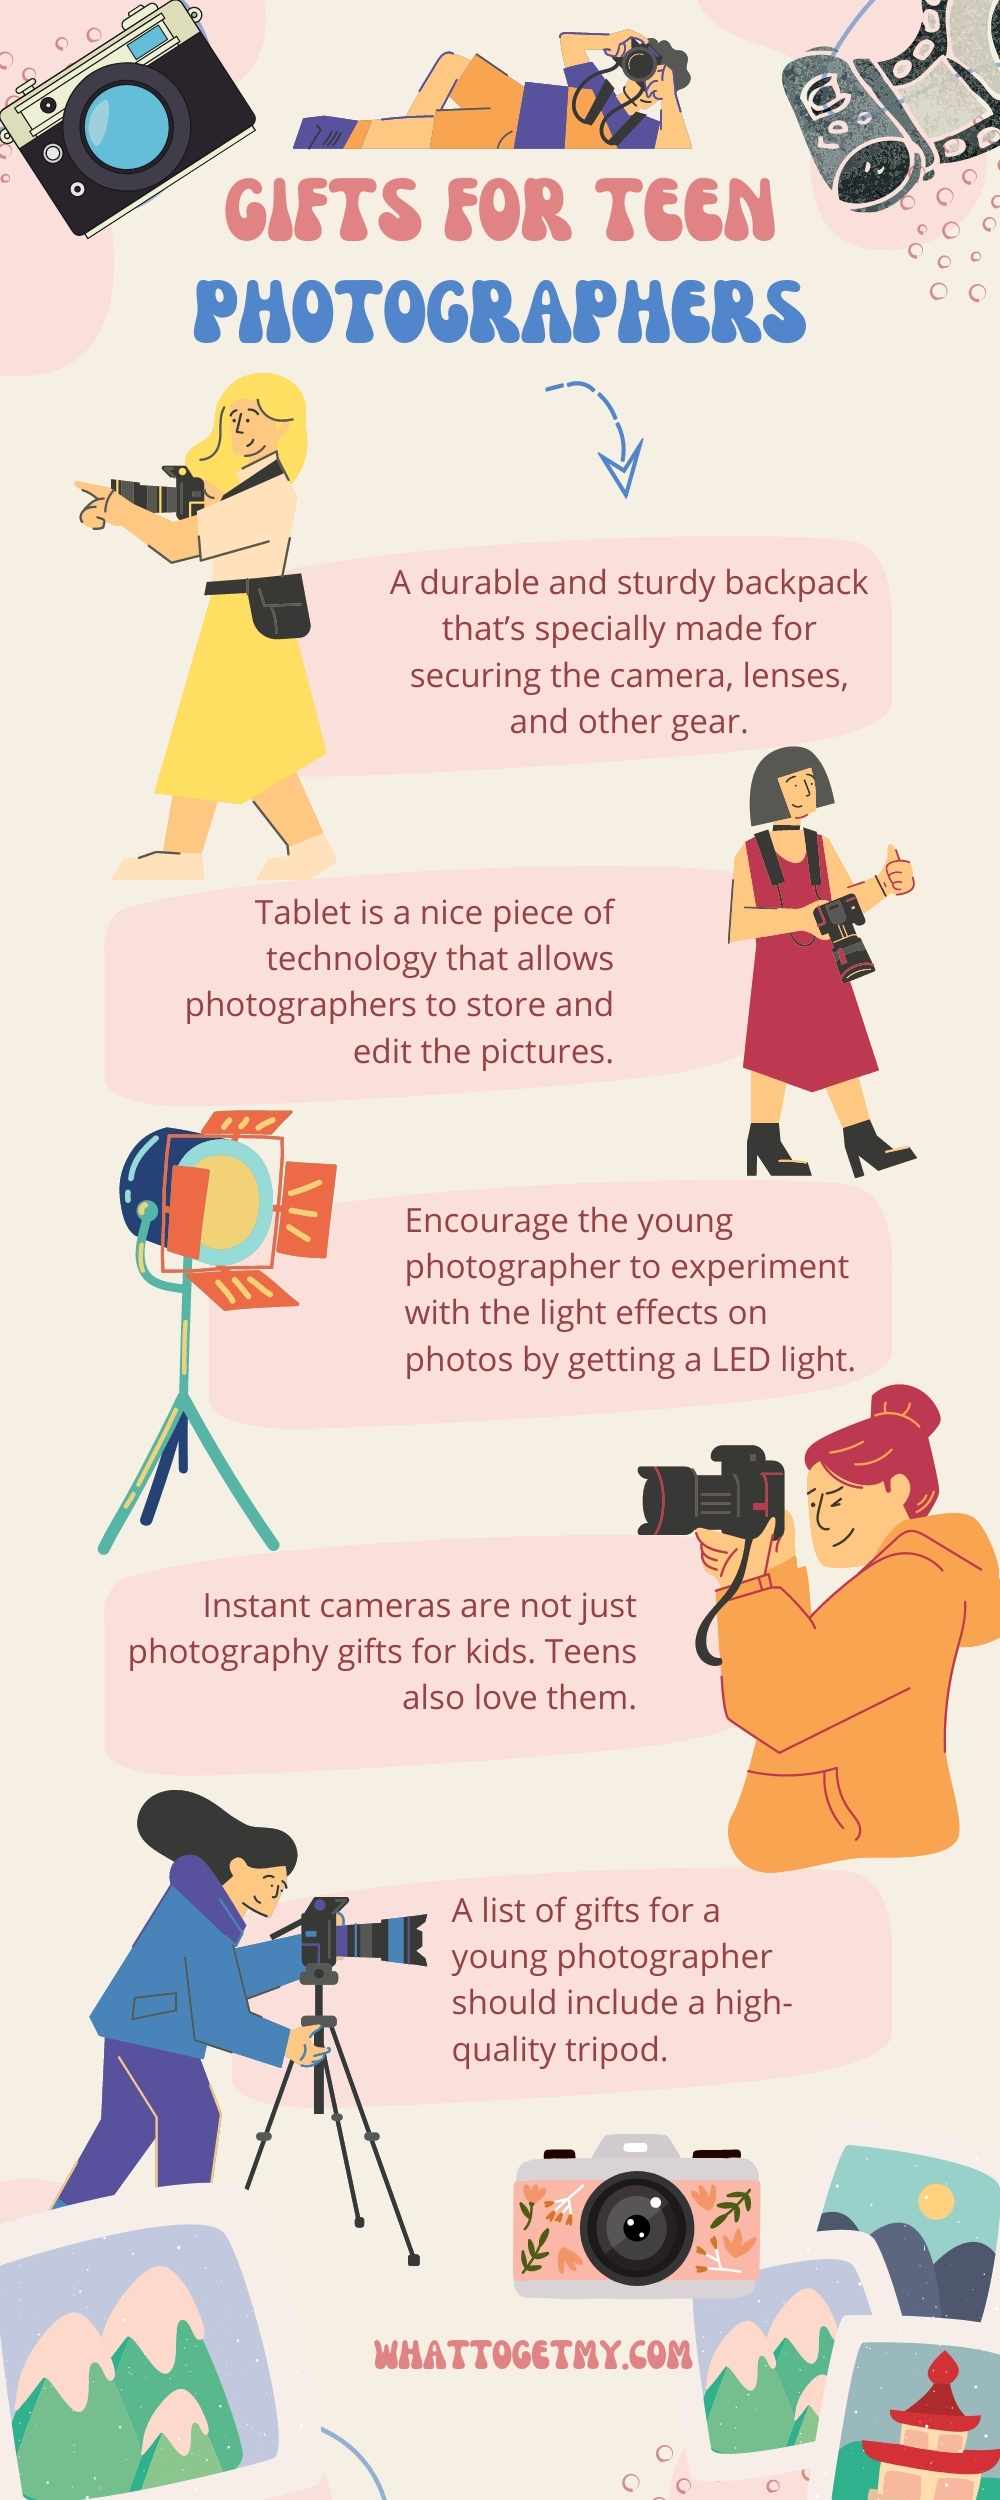 GIFTS FOR TEEN PHOTOGRAPHERS